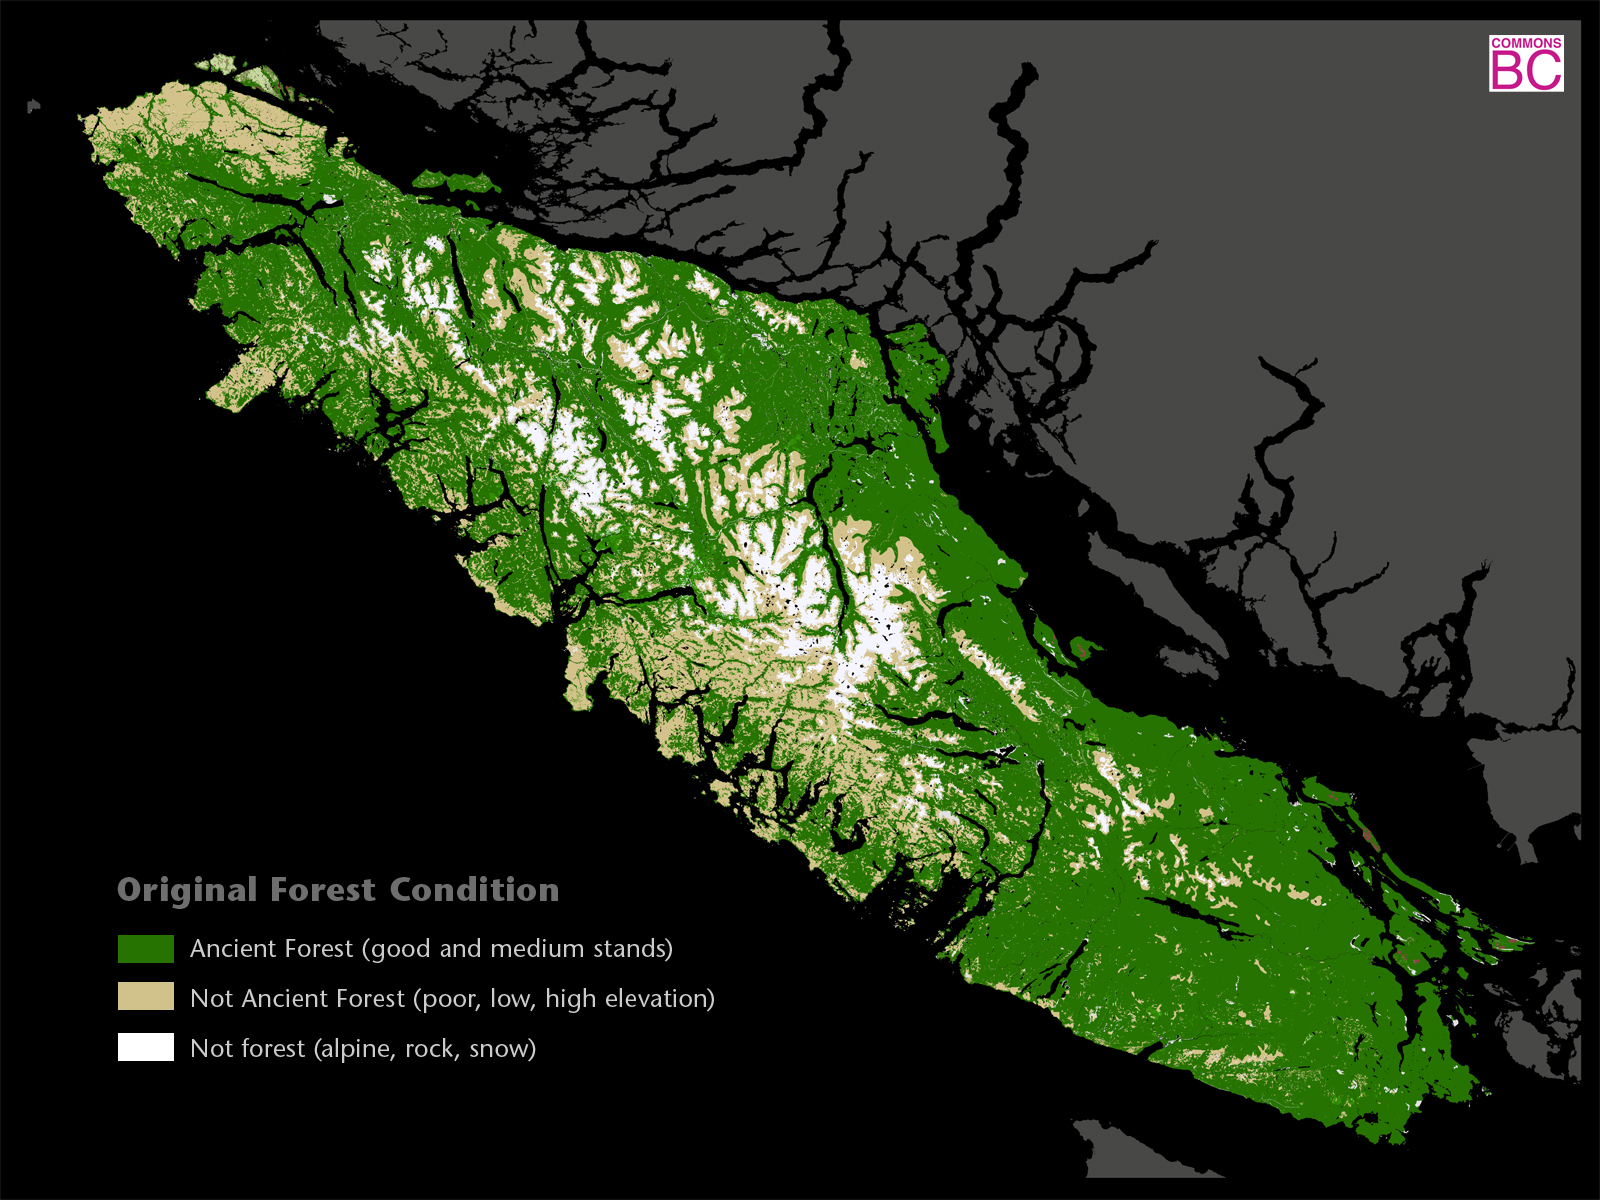 BC old growth map - Supplied by Commons BC 